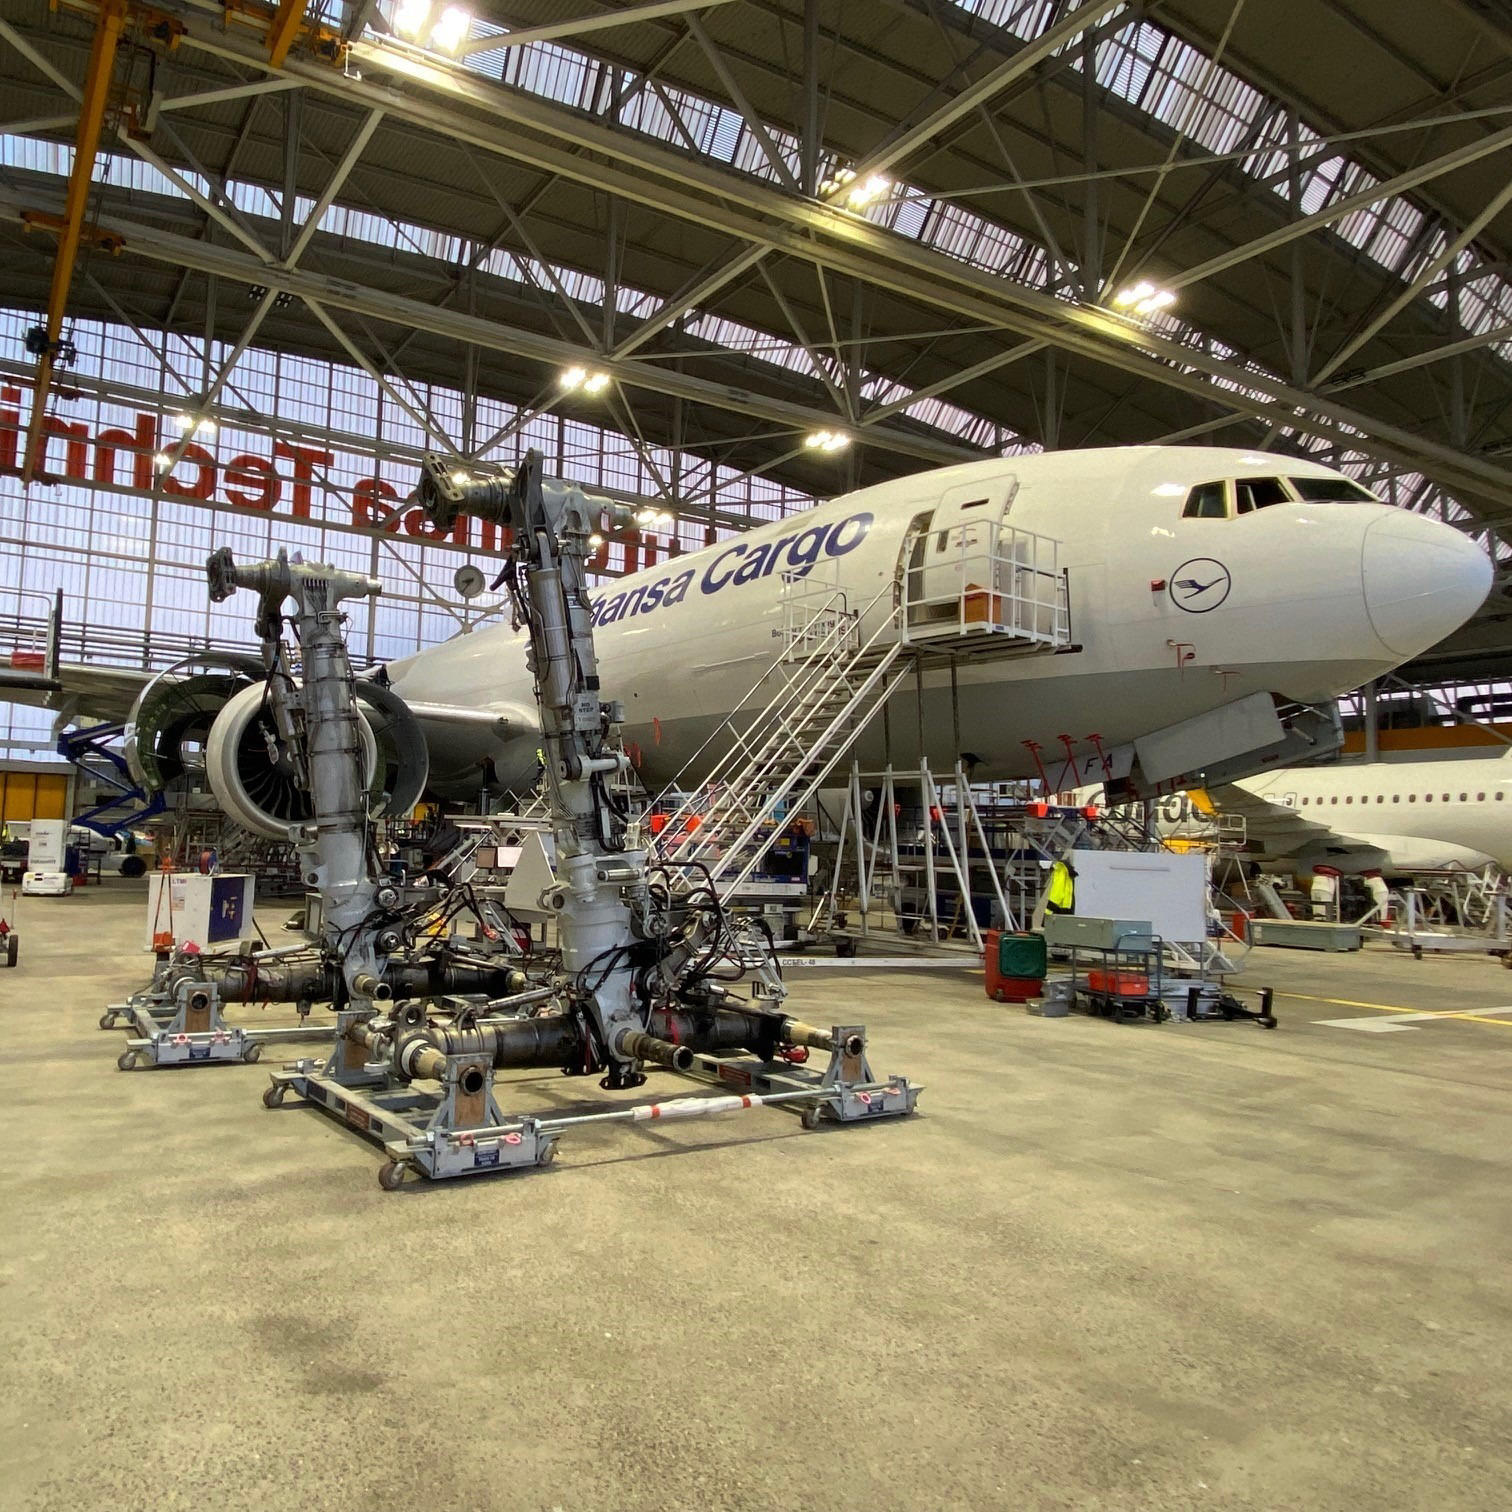 We kicked off January with a new maintenance project in our Boeing 777F fleet